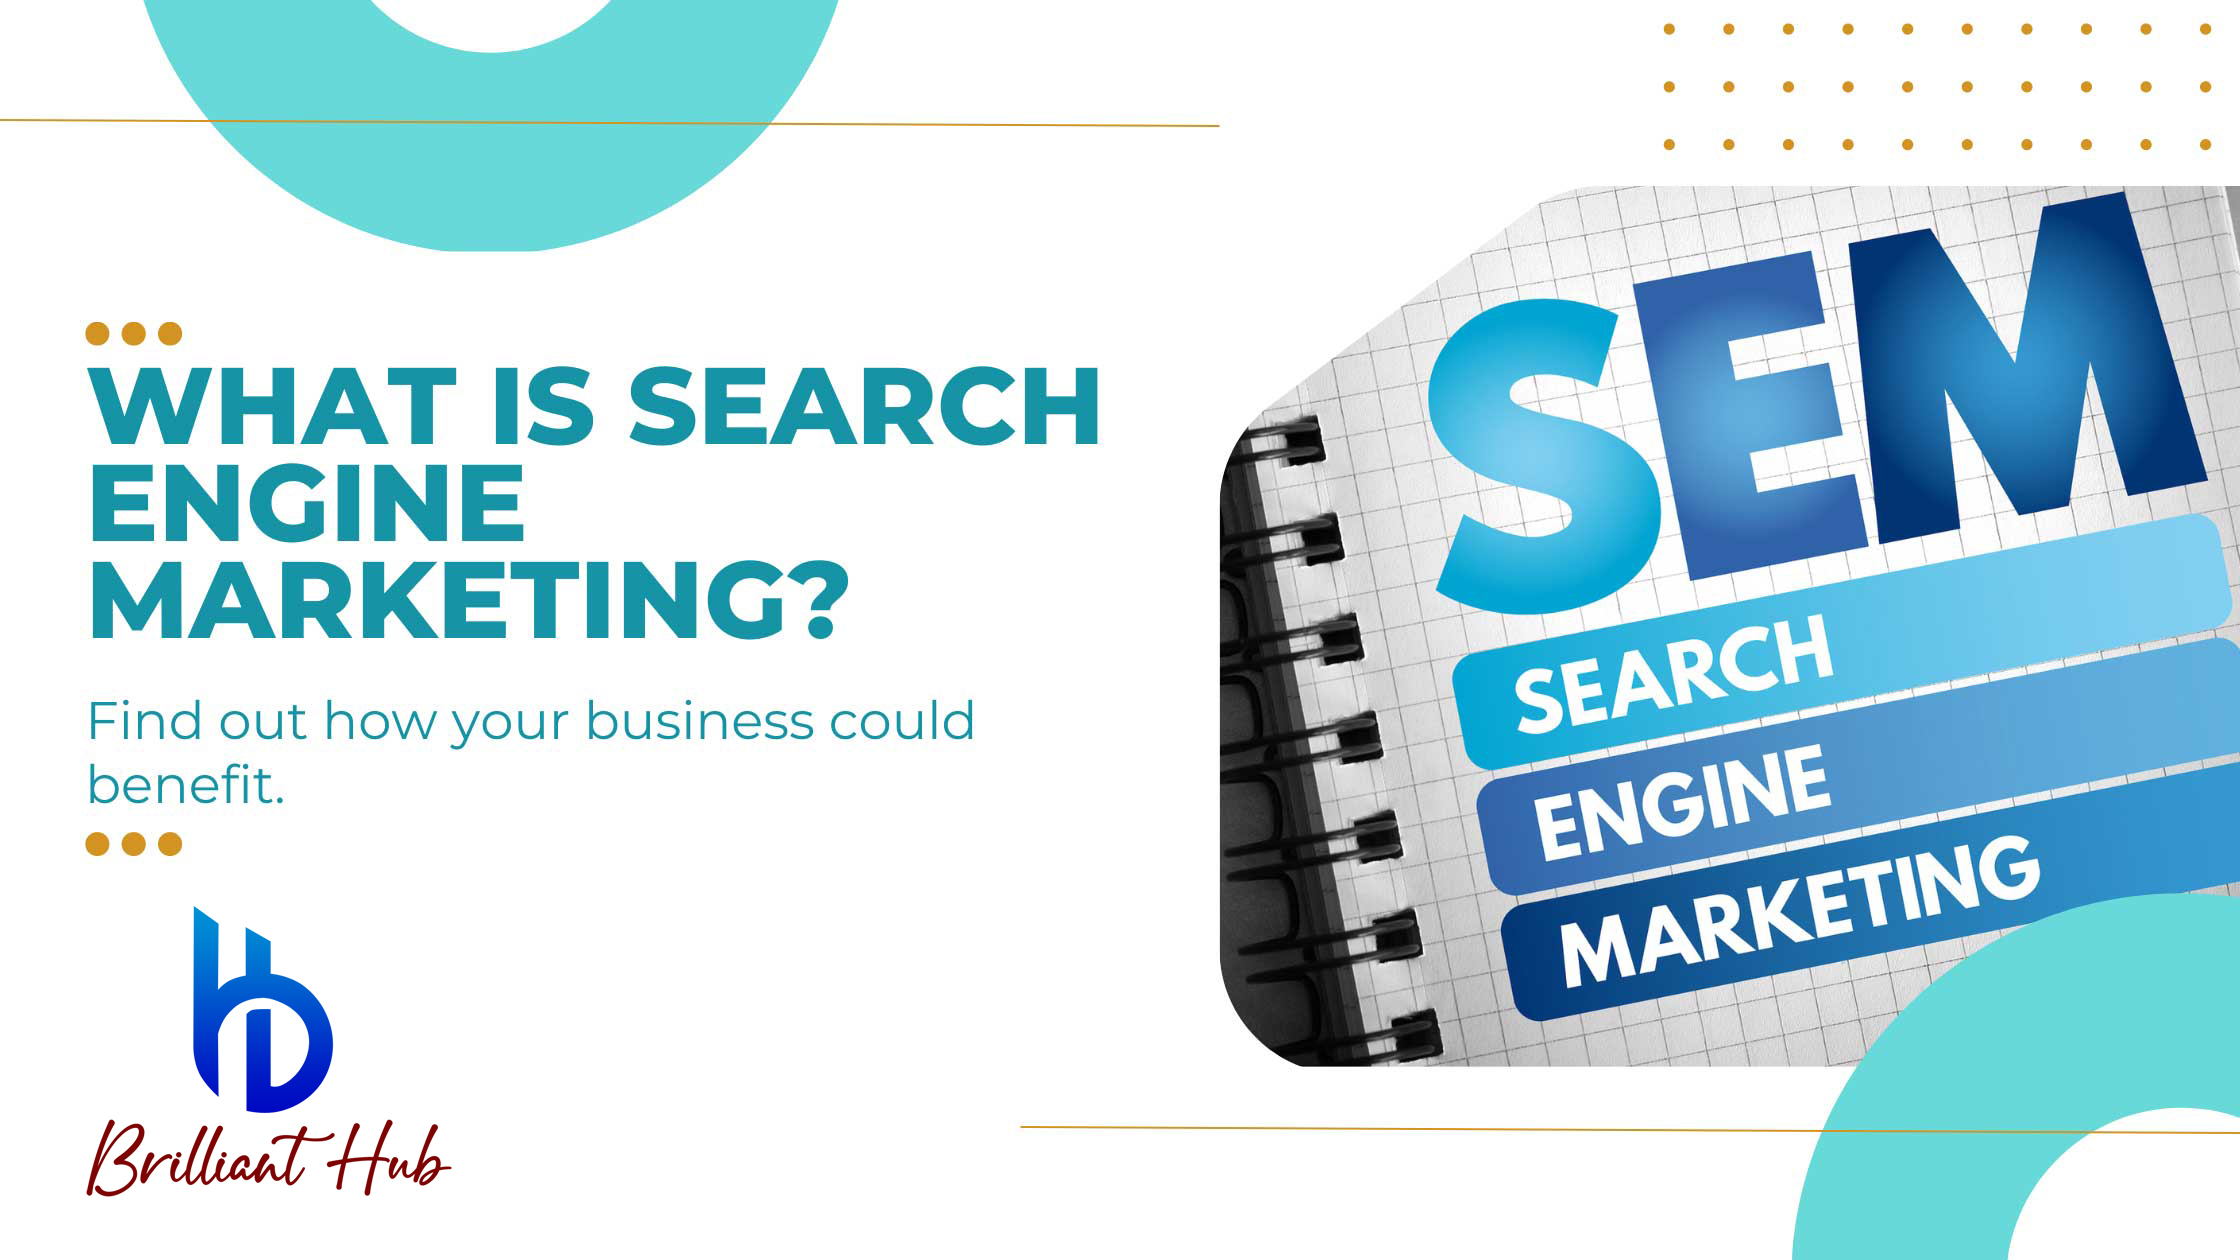 Everything You Need To Know About Search Engine Marketing